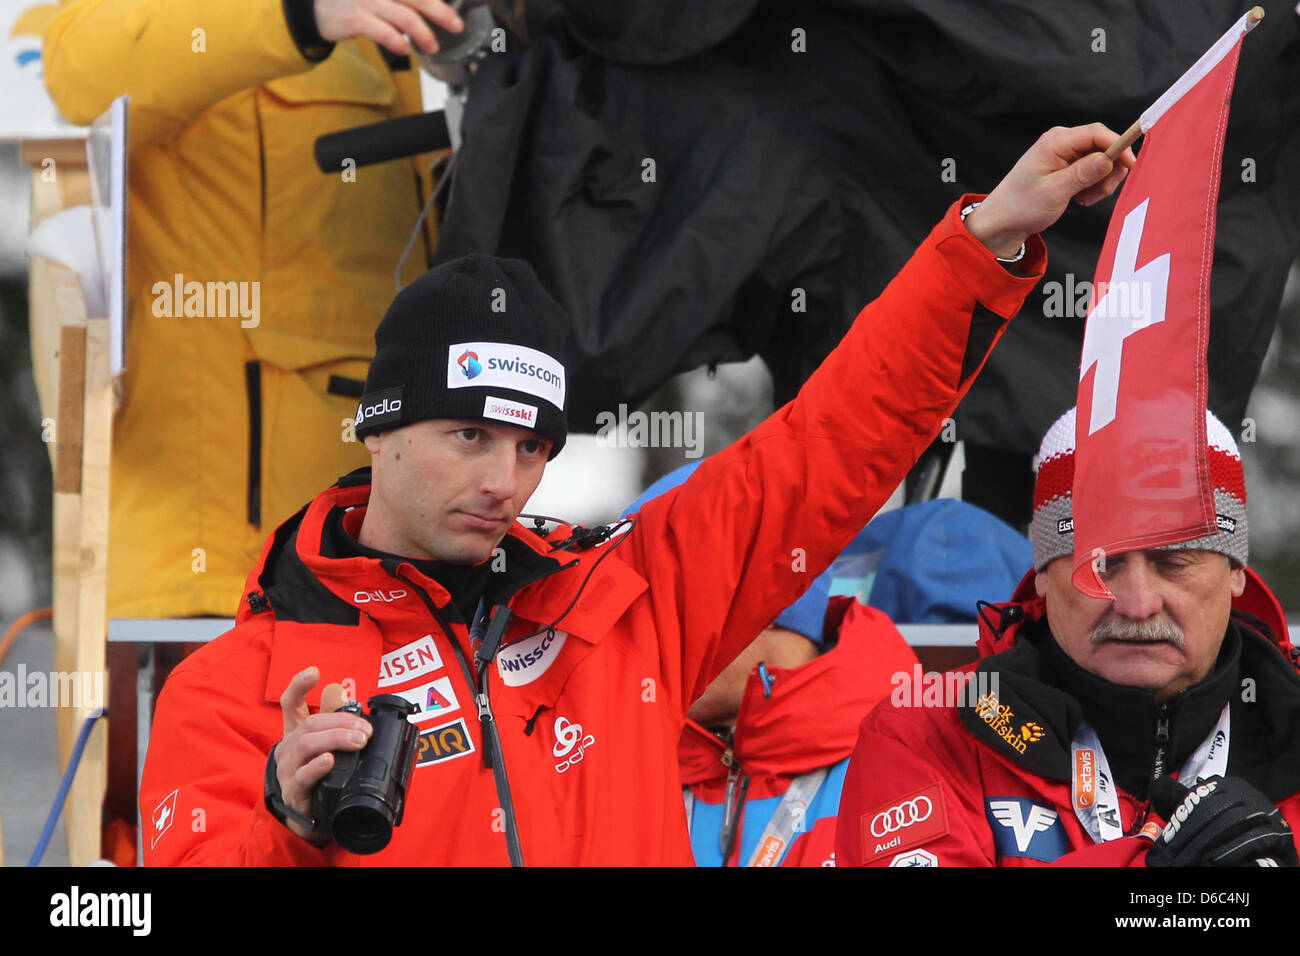 Swiss ski jumping coach Martin Kuenzle gives the signal to start a jump  during the third jump of the 60th Four Hills Tournament in Innsbruck,  Germany, 04 January 2012. Photo: Daniel Karmann